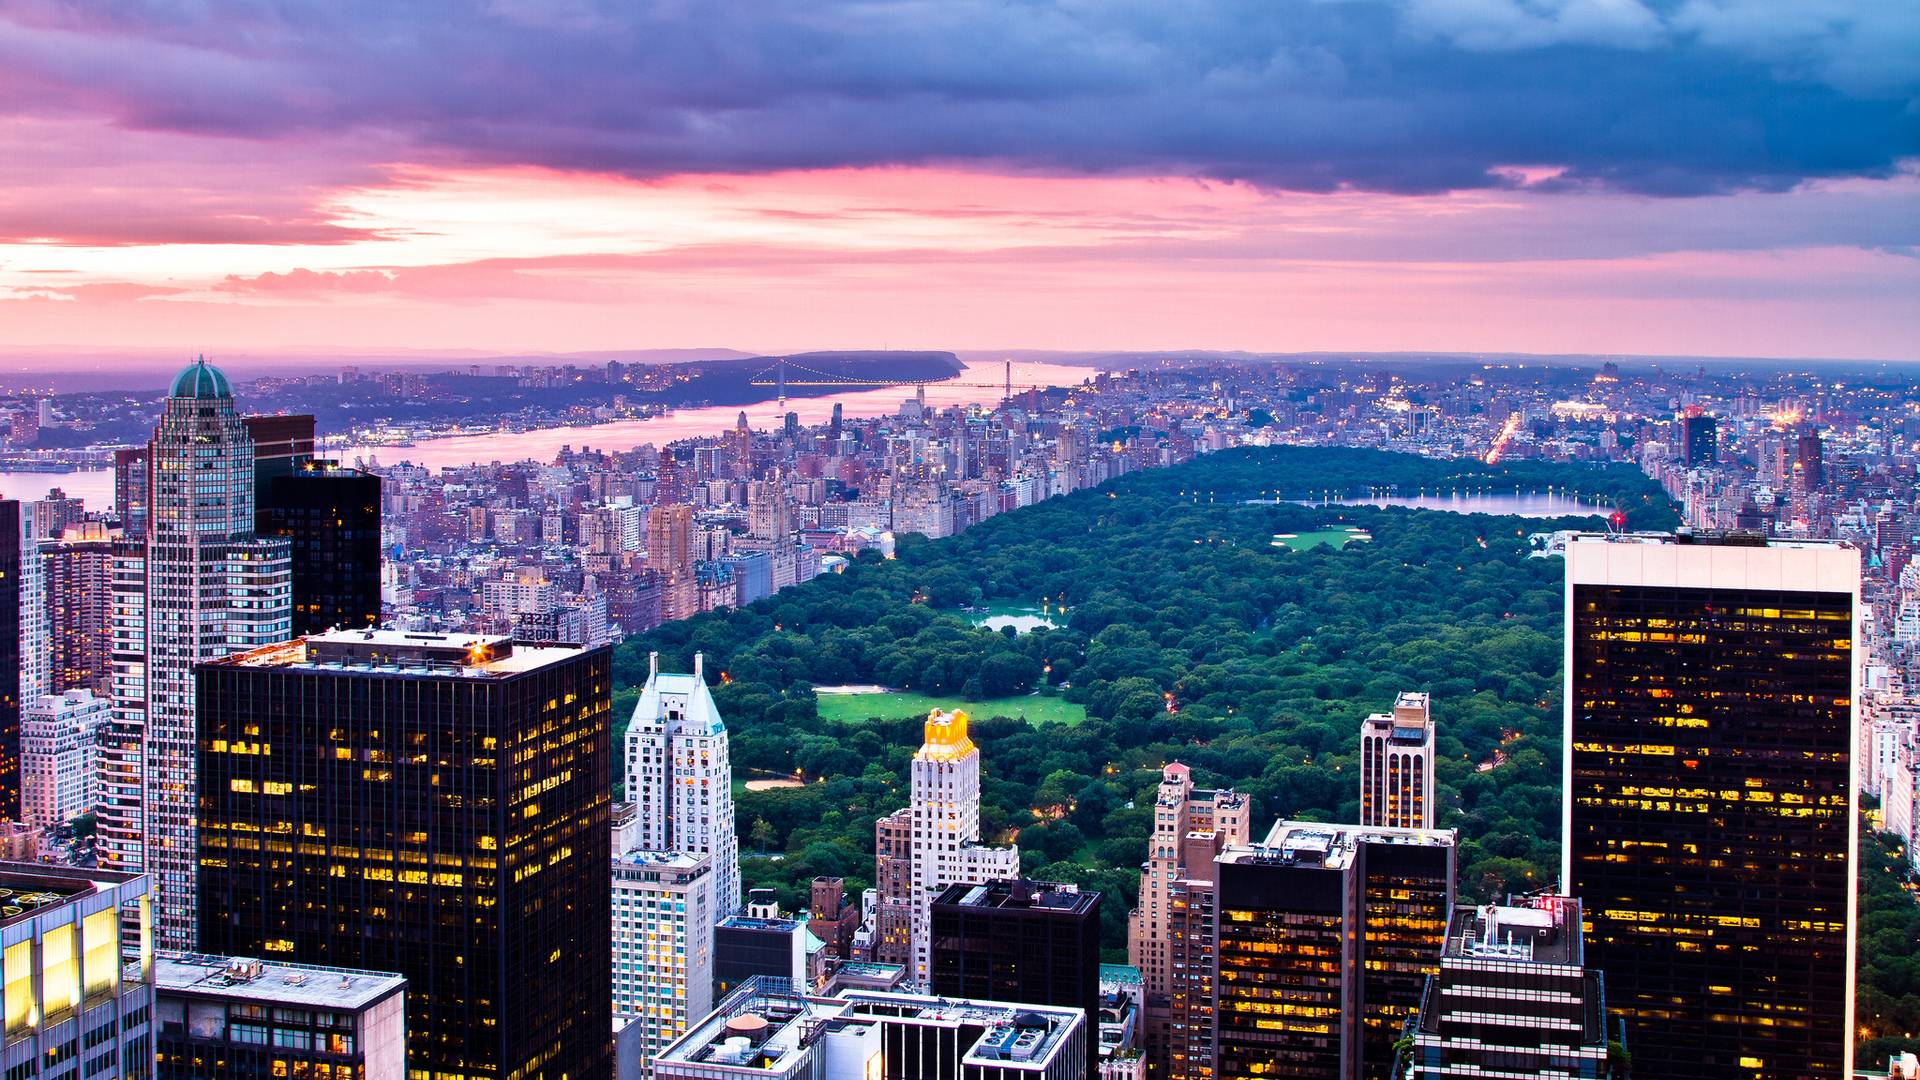 Central Park HD Wallpapers